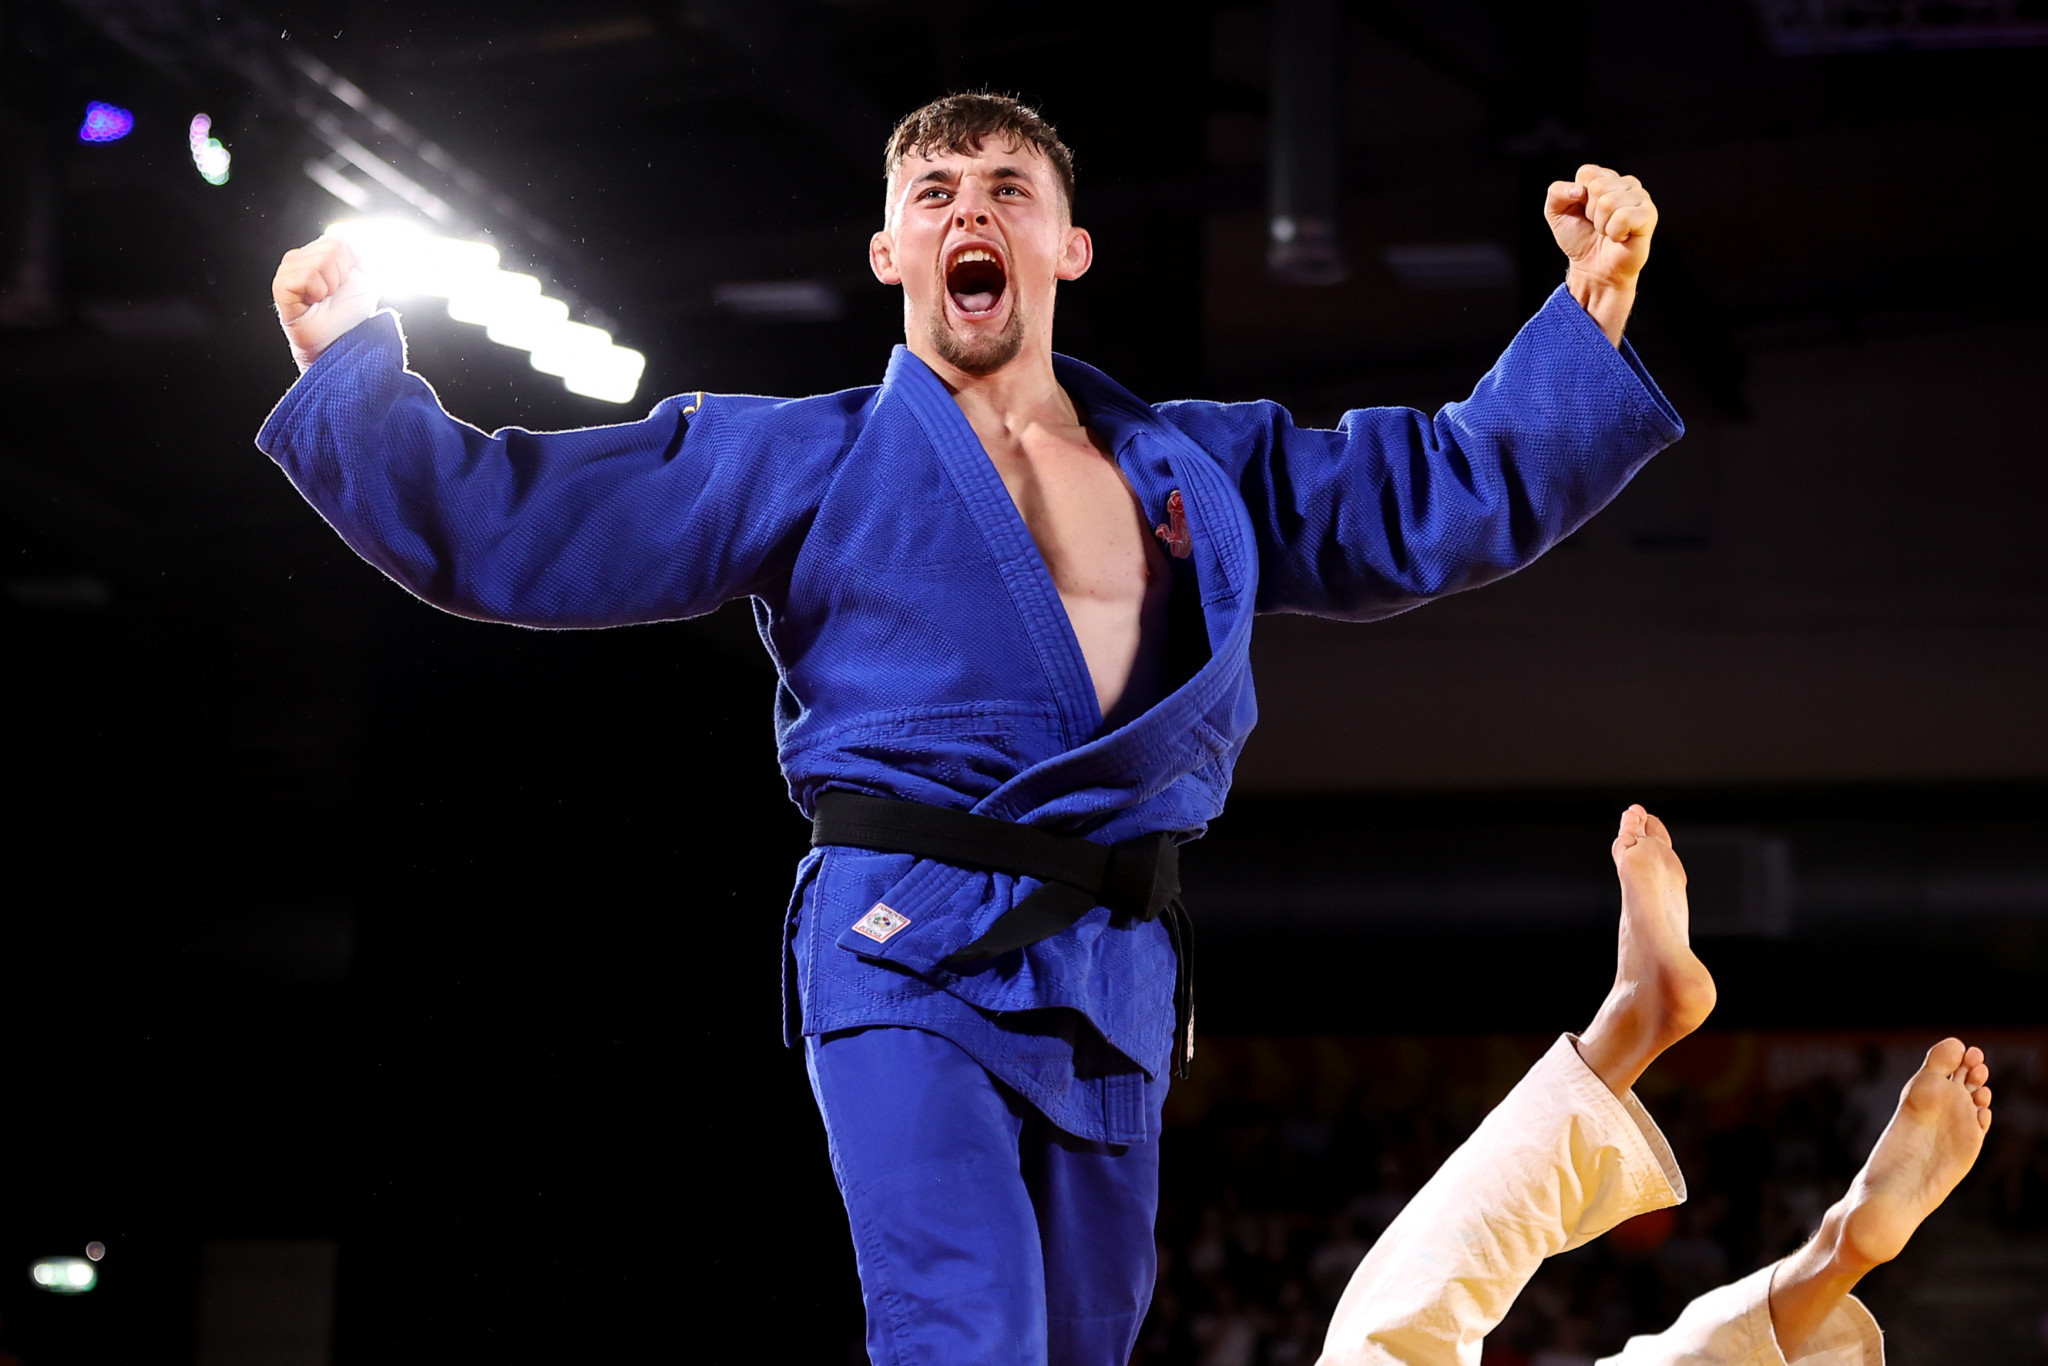 Lachlan Moorhead claimed gold in judo after an explosive end to the session tonight ©Getty Images